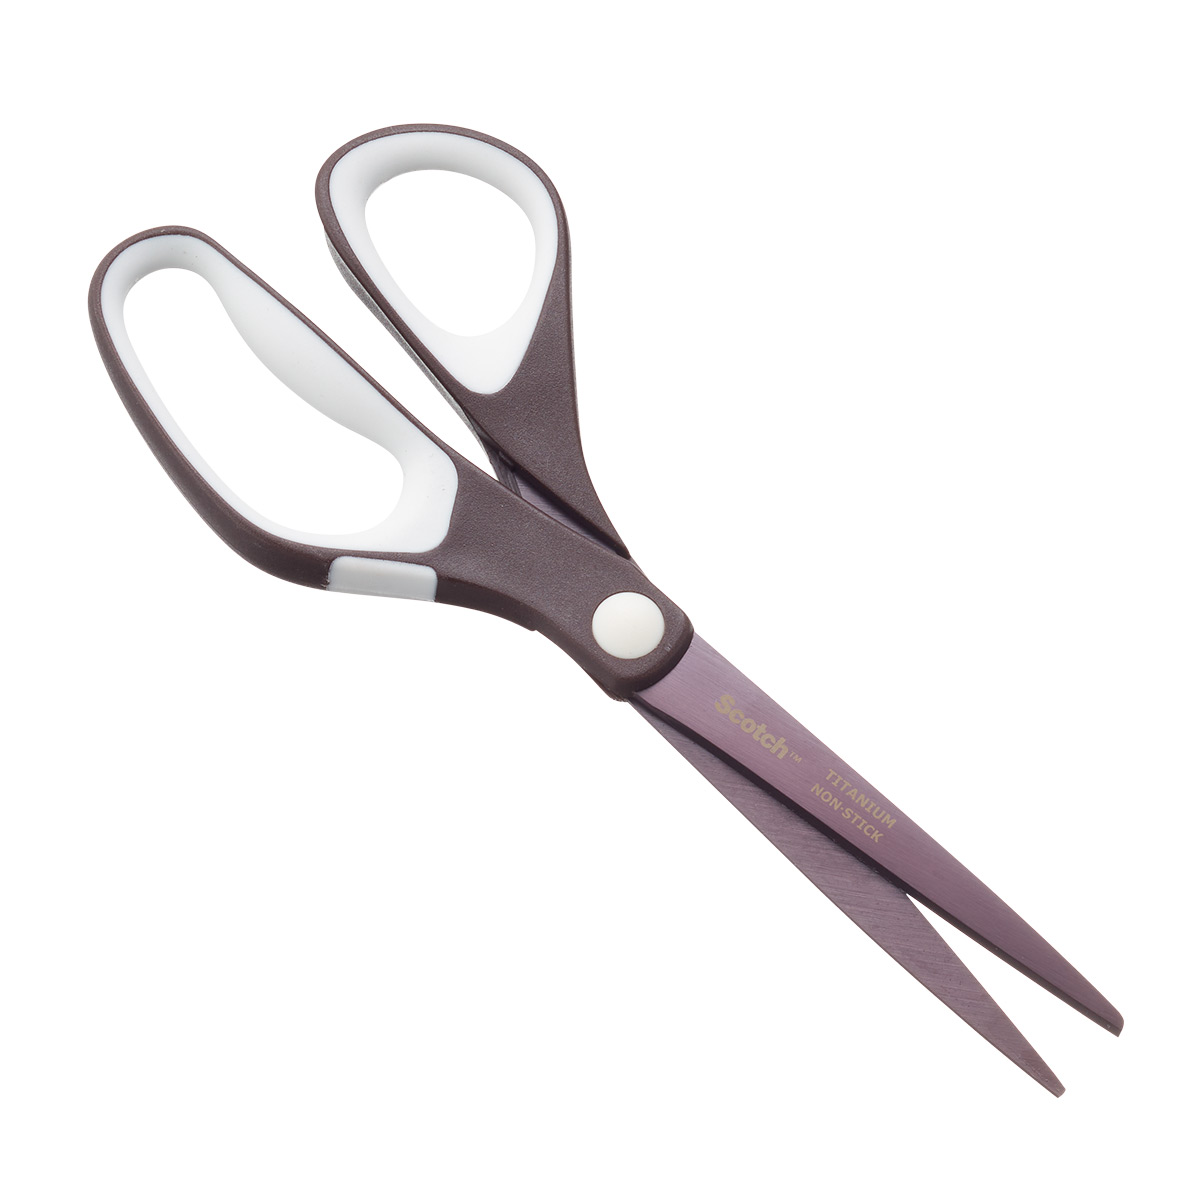 EYE on NPI: 3M Scotch Precision Scissors #EYEonNPI #DigiKey #Adafruit  @DigiKey @Scotch @Adafruit « Adafruit Industries – Makers, hackers,  artists, designers and engineers!